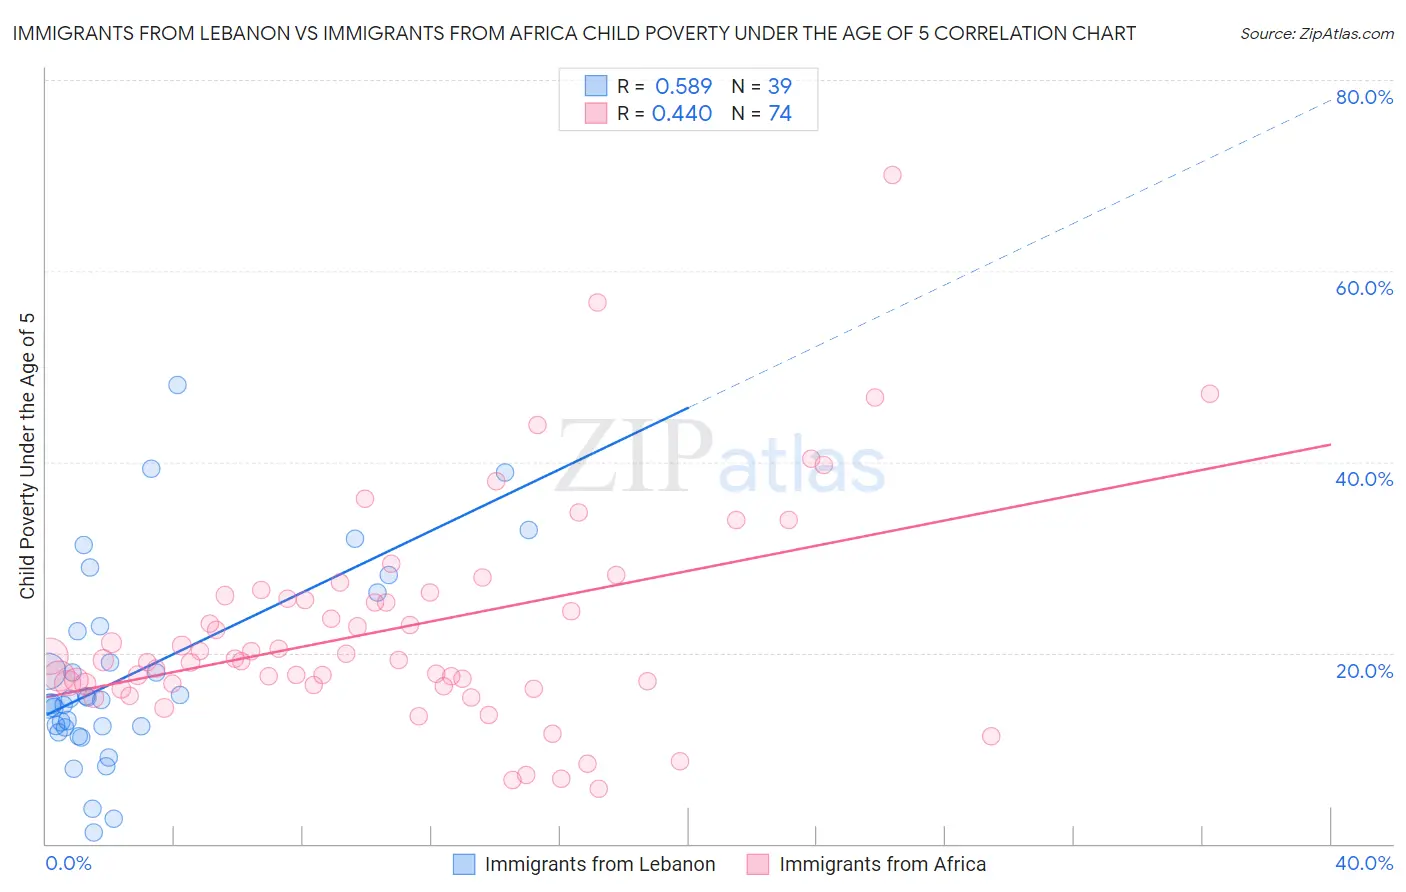 Immigrants from Lebanon vs Immigrants from Africa Child Poverty Under the Age of 5